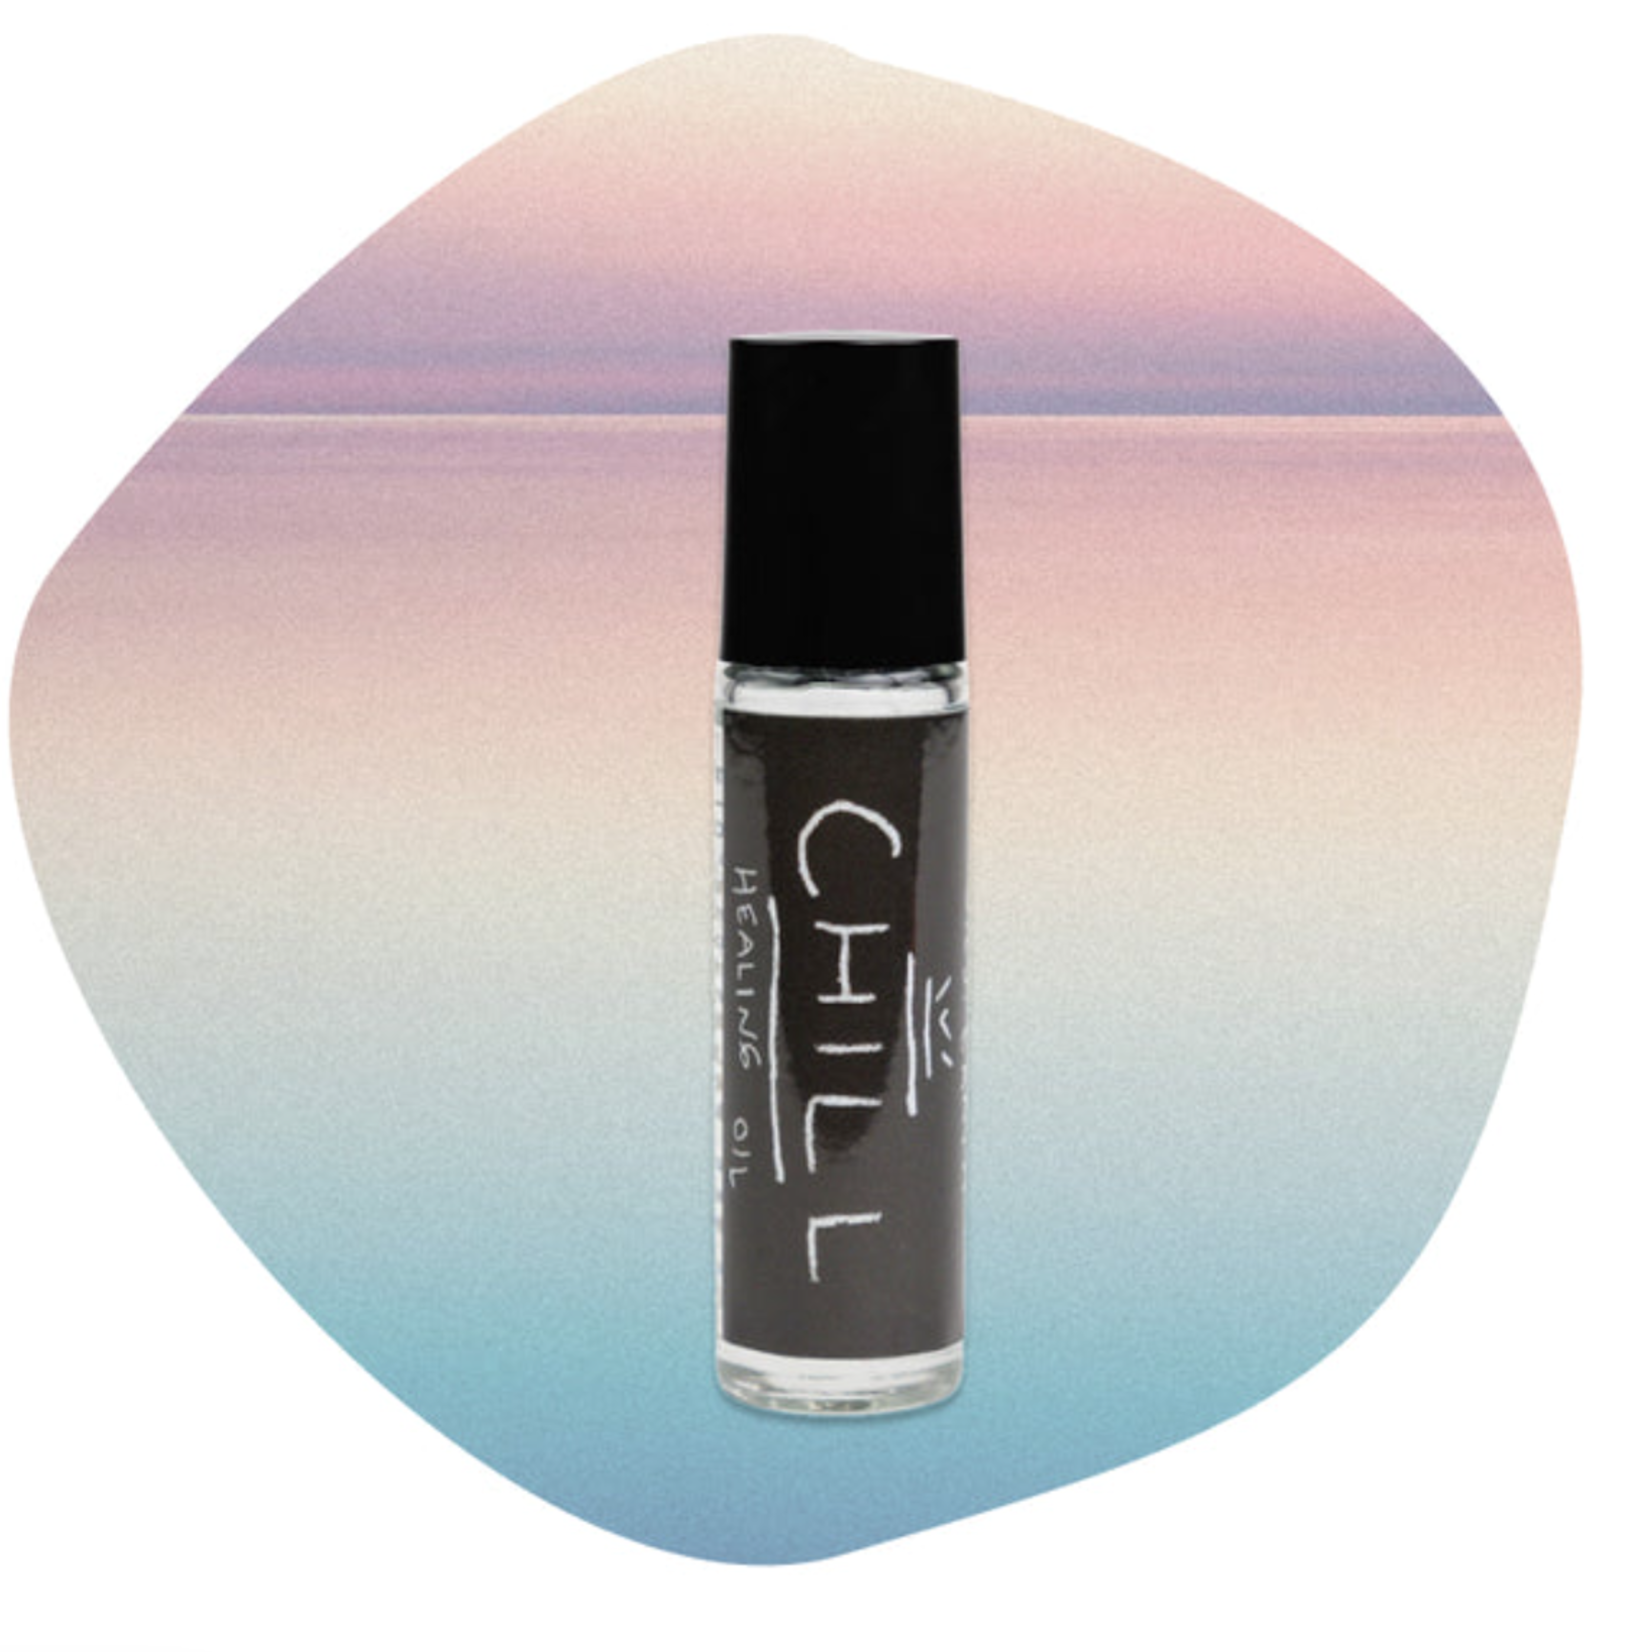 Oils Earth Chill Roller Fragrance Oil by Oils Earth